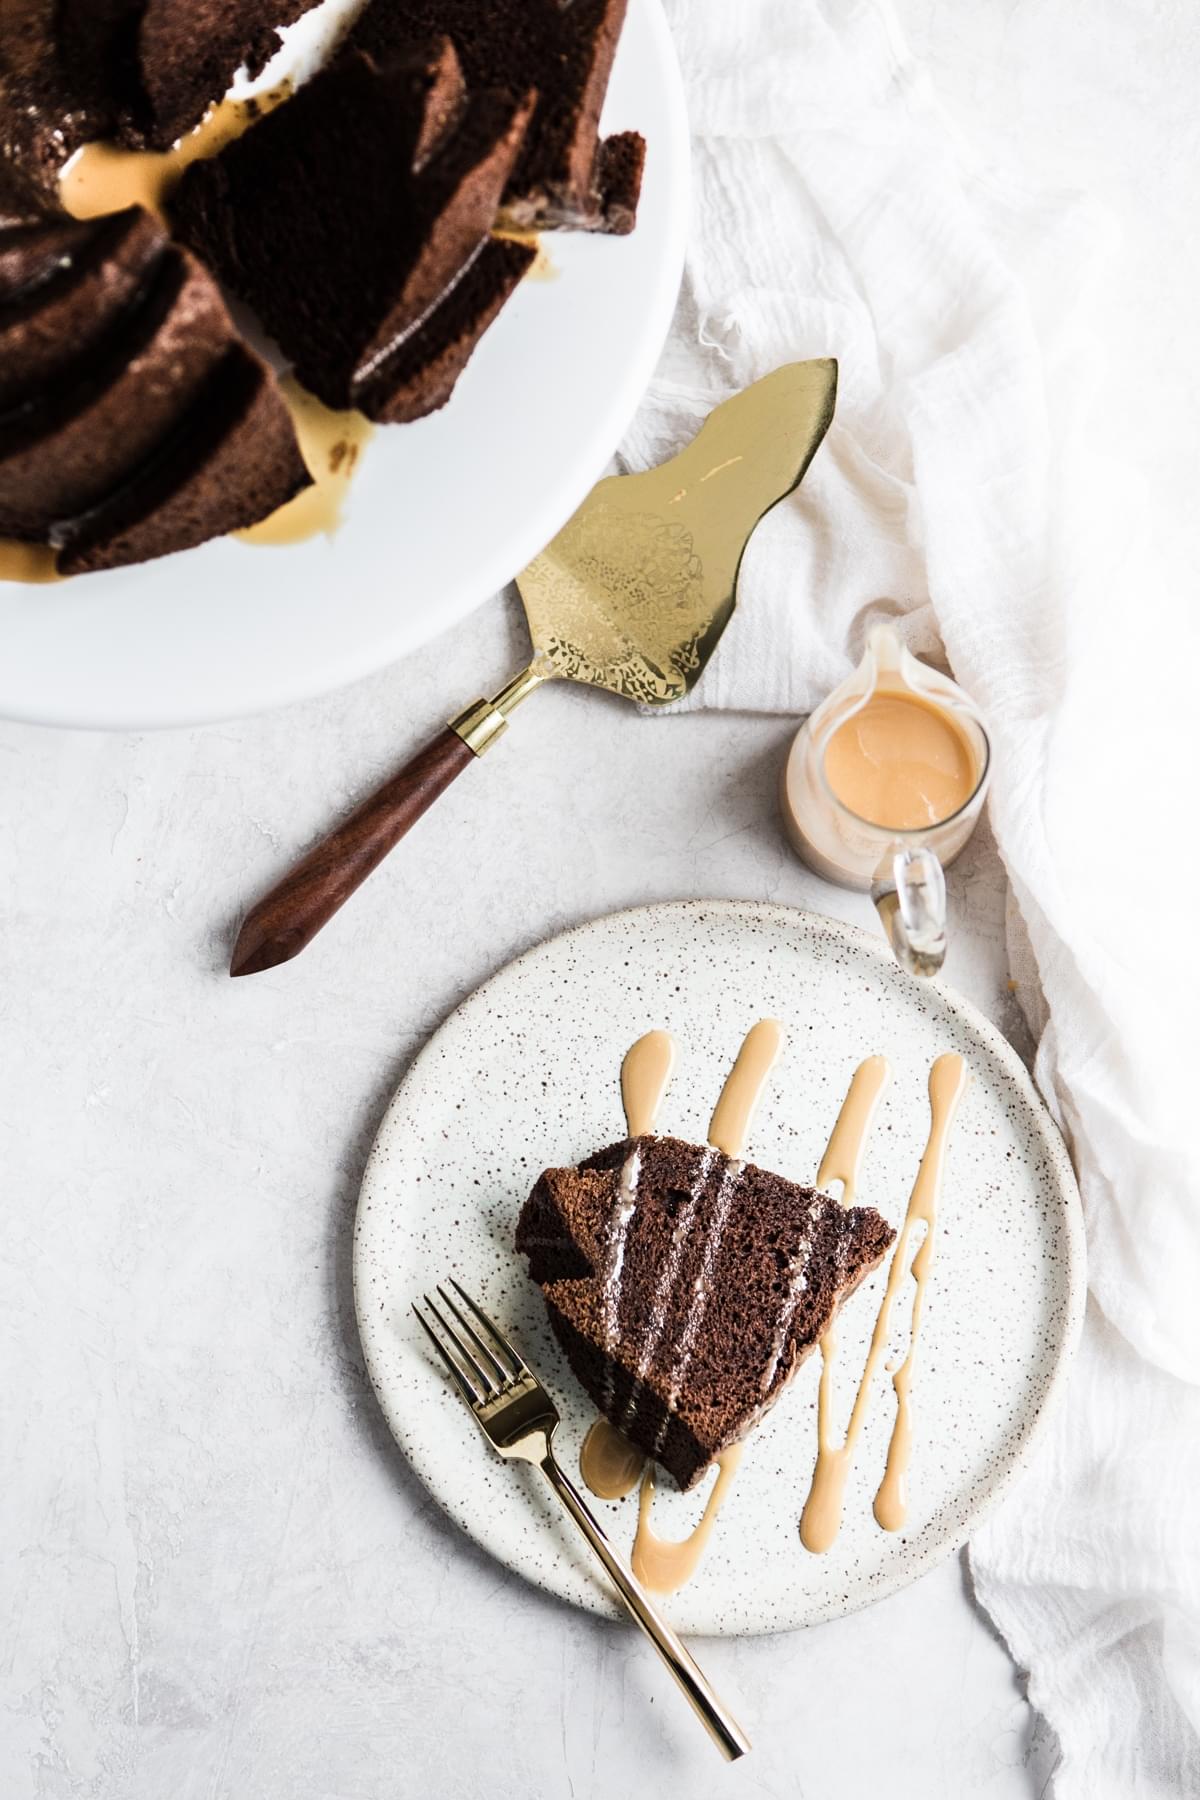 a slice of Chocolate Bundt Cake with an icing drizzle on a plate